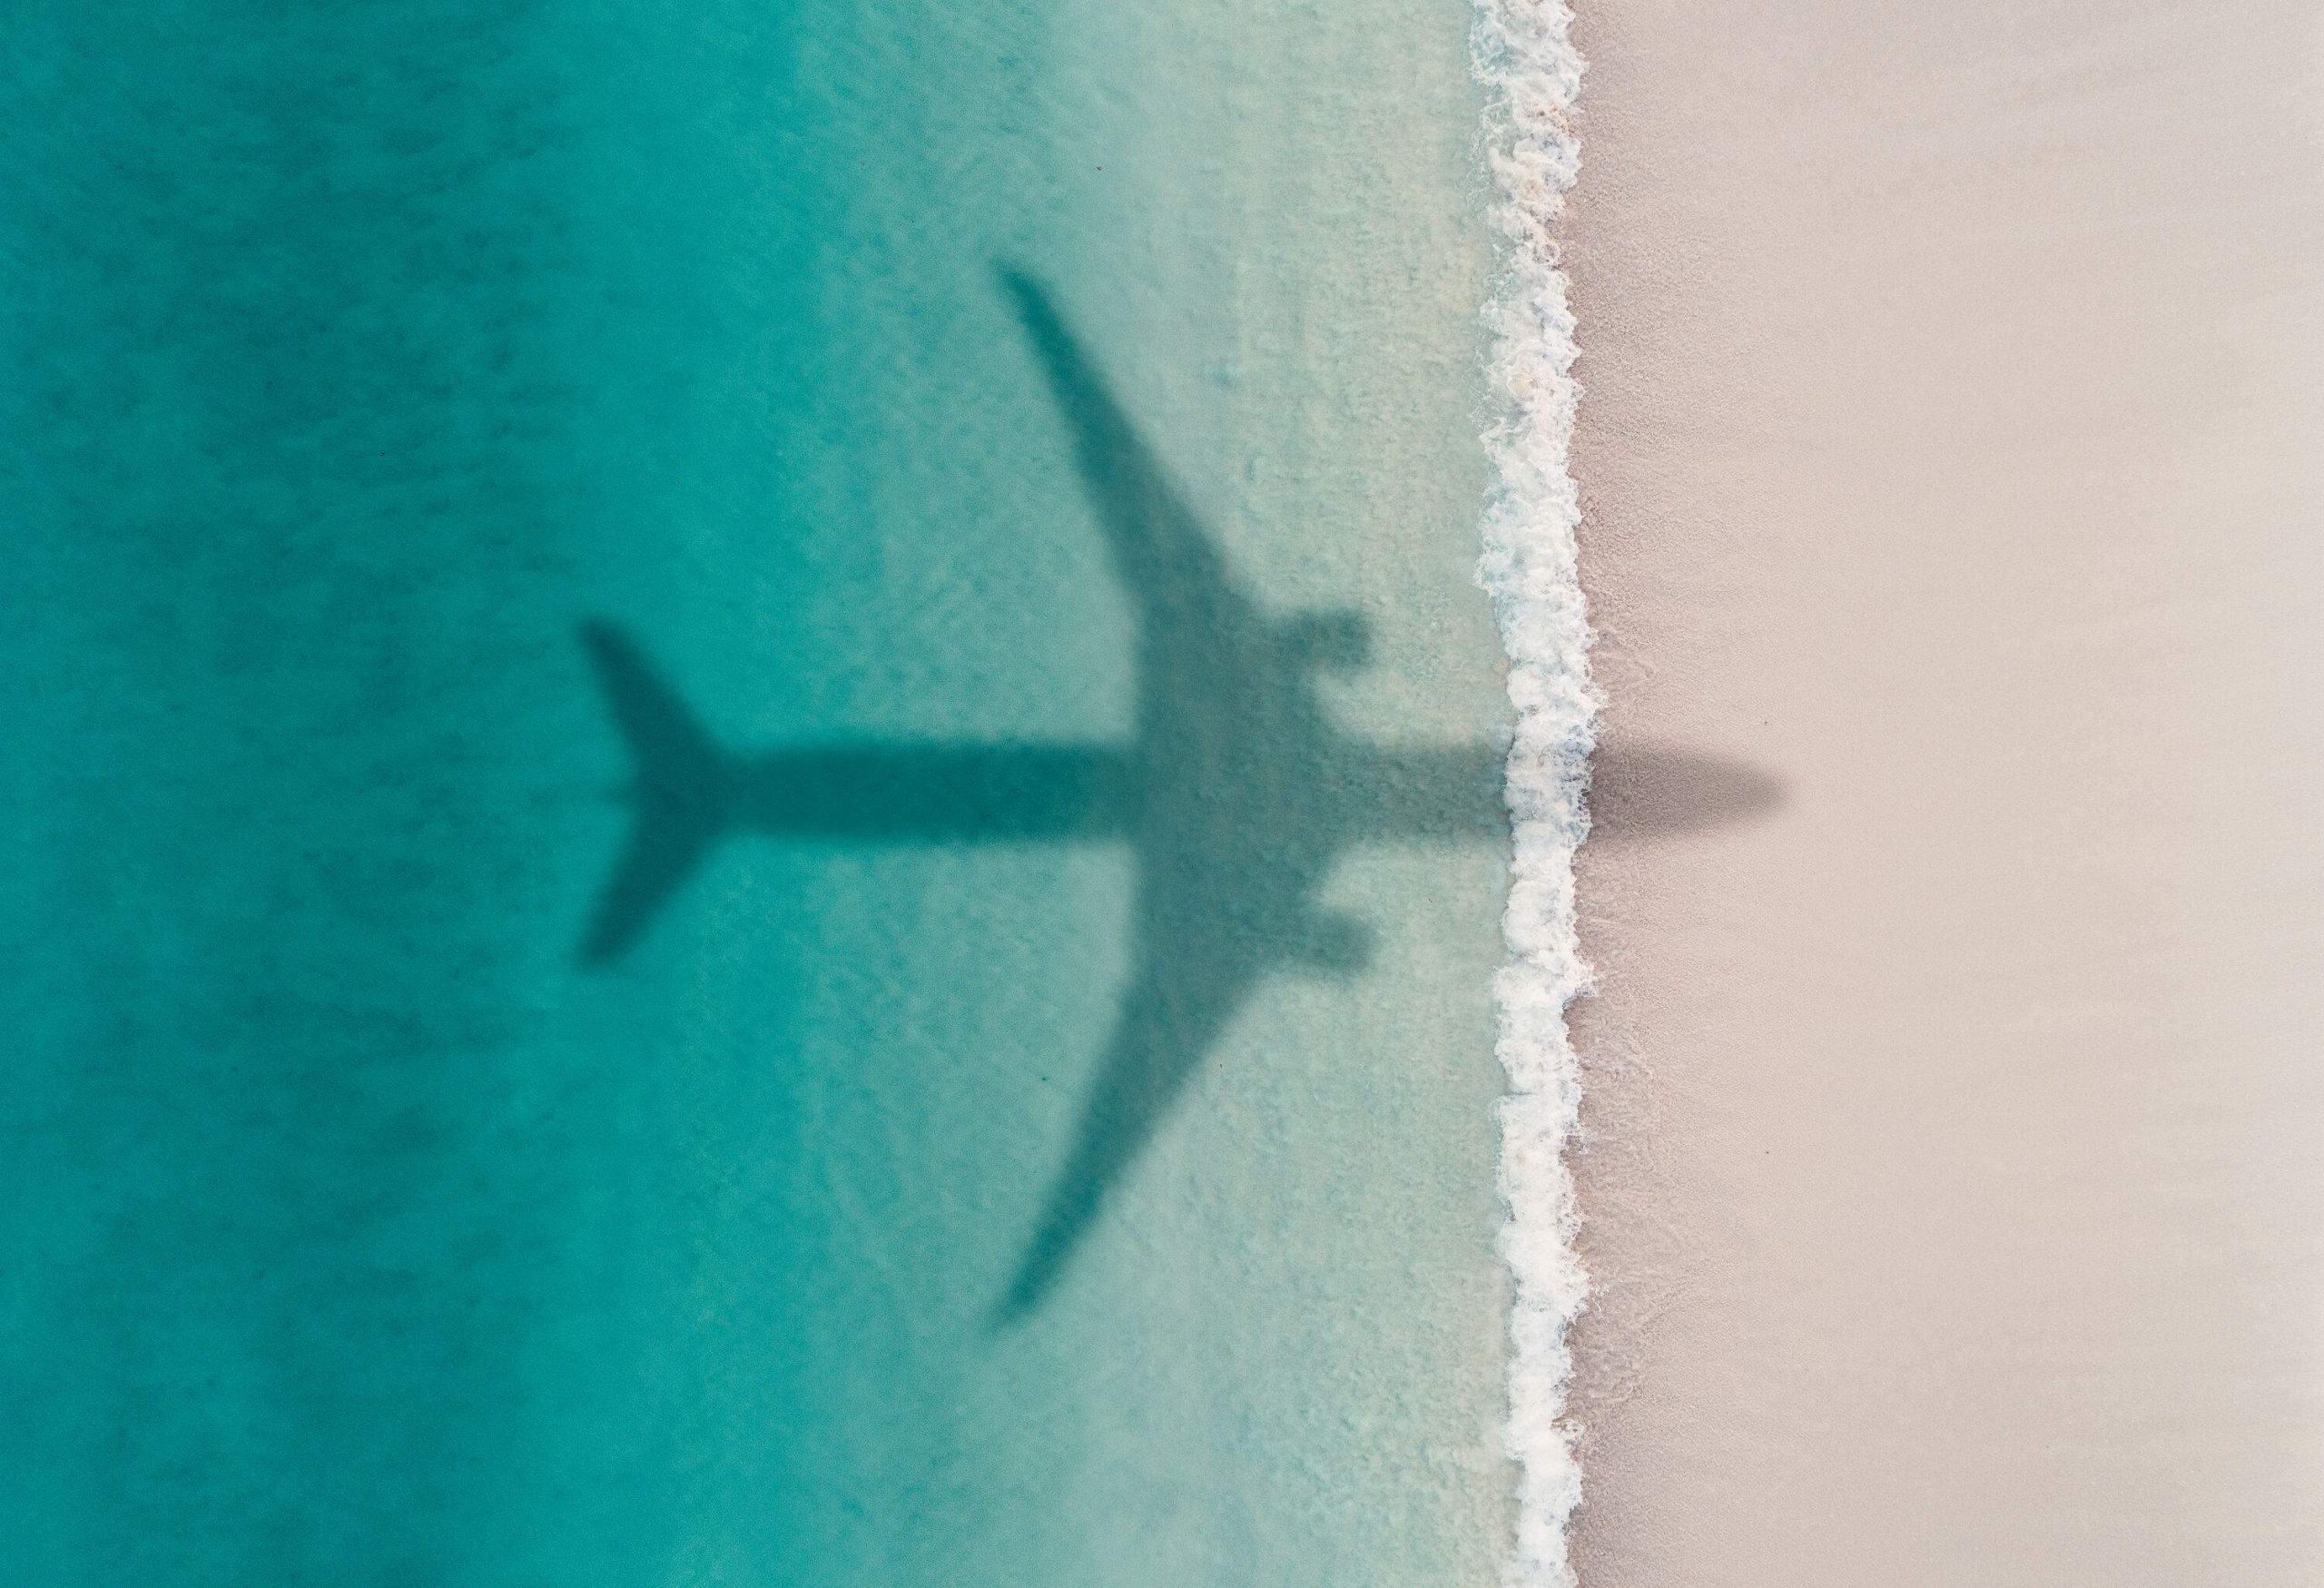 An airplane's shadow casts on a beach with turquoise waters.